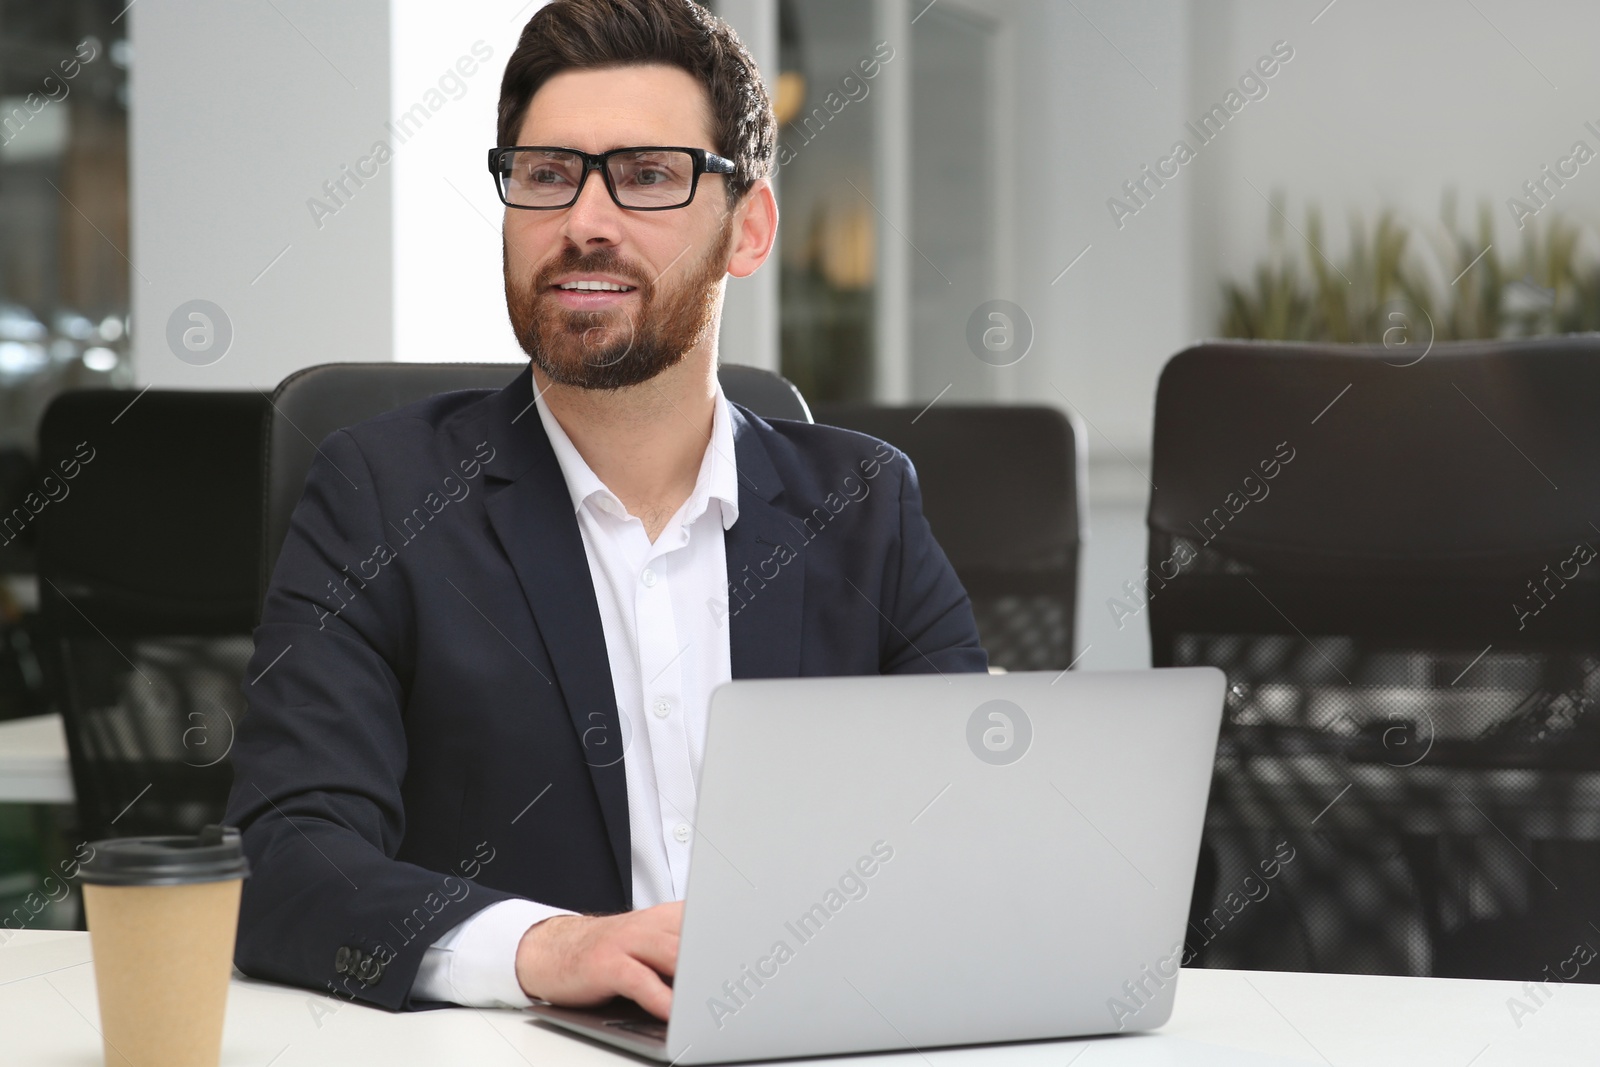 Photo of Man working on laptop at white desk in office